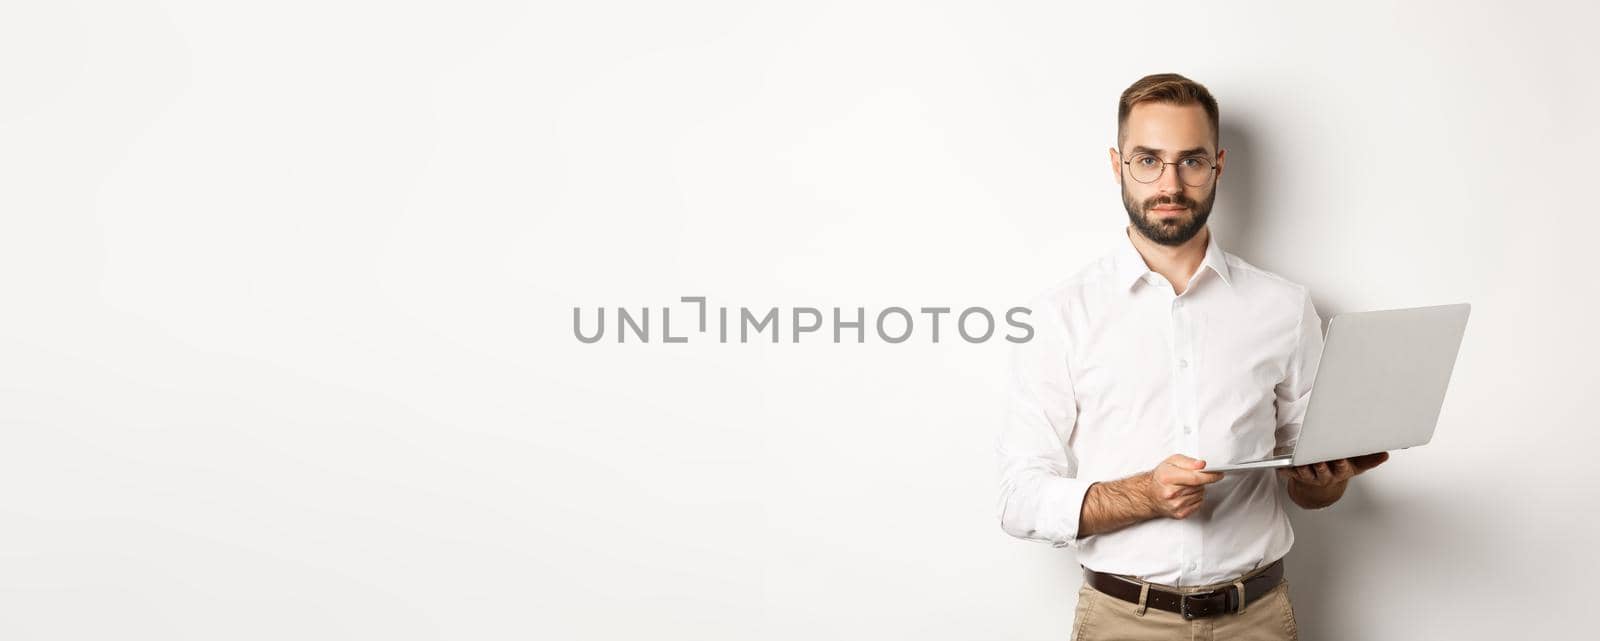 Business. Handsome manager working on laptop, holding computer and looking at camera, standing over white background.